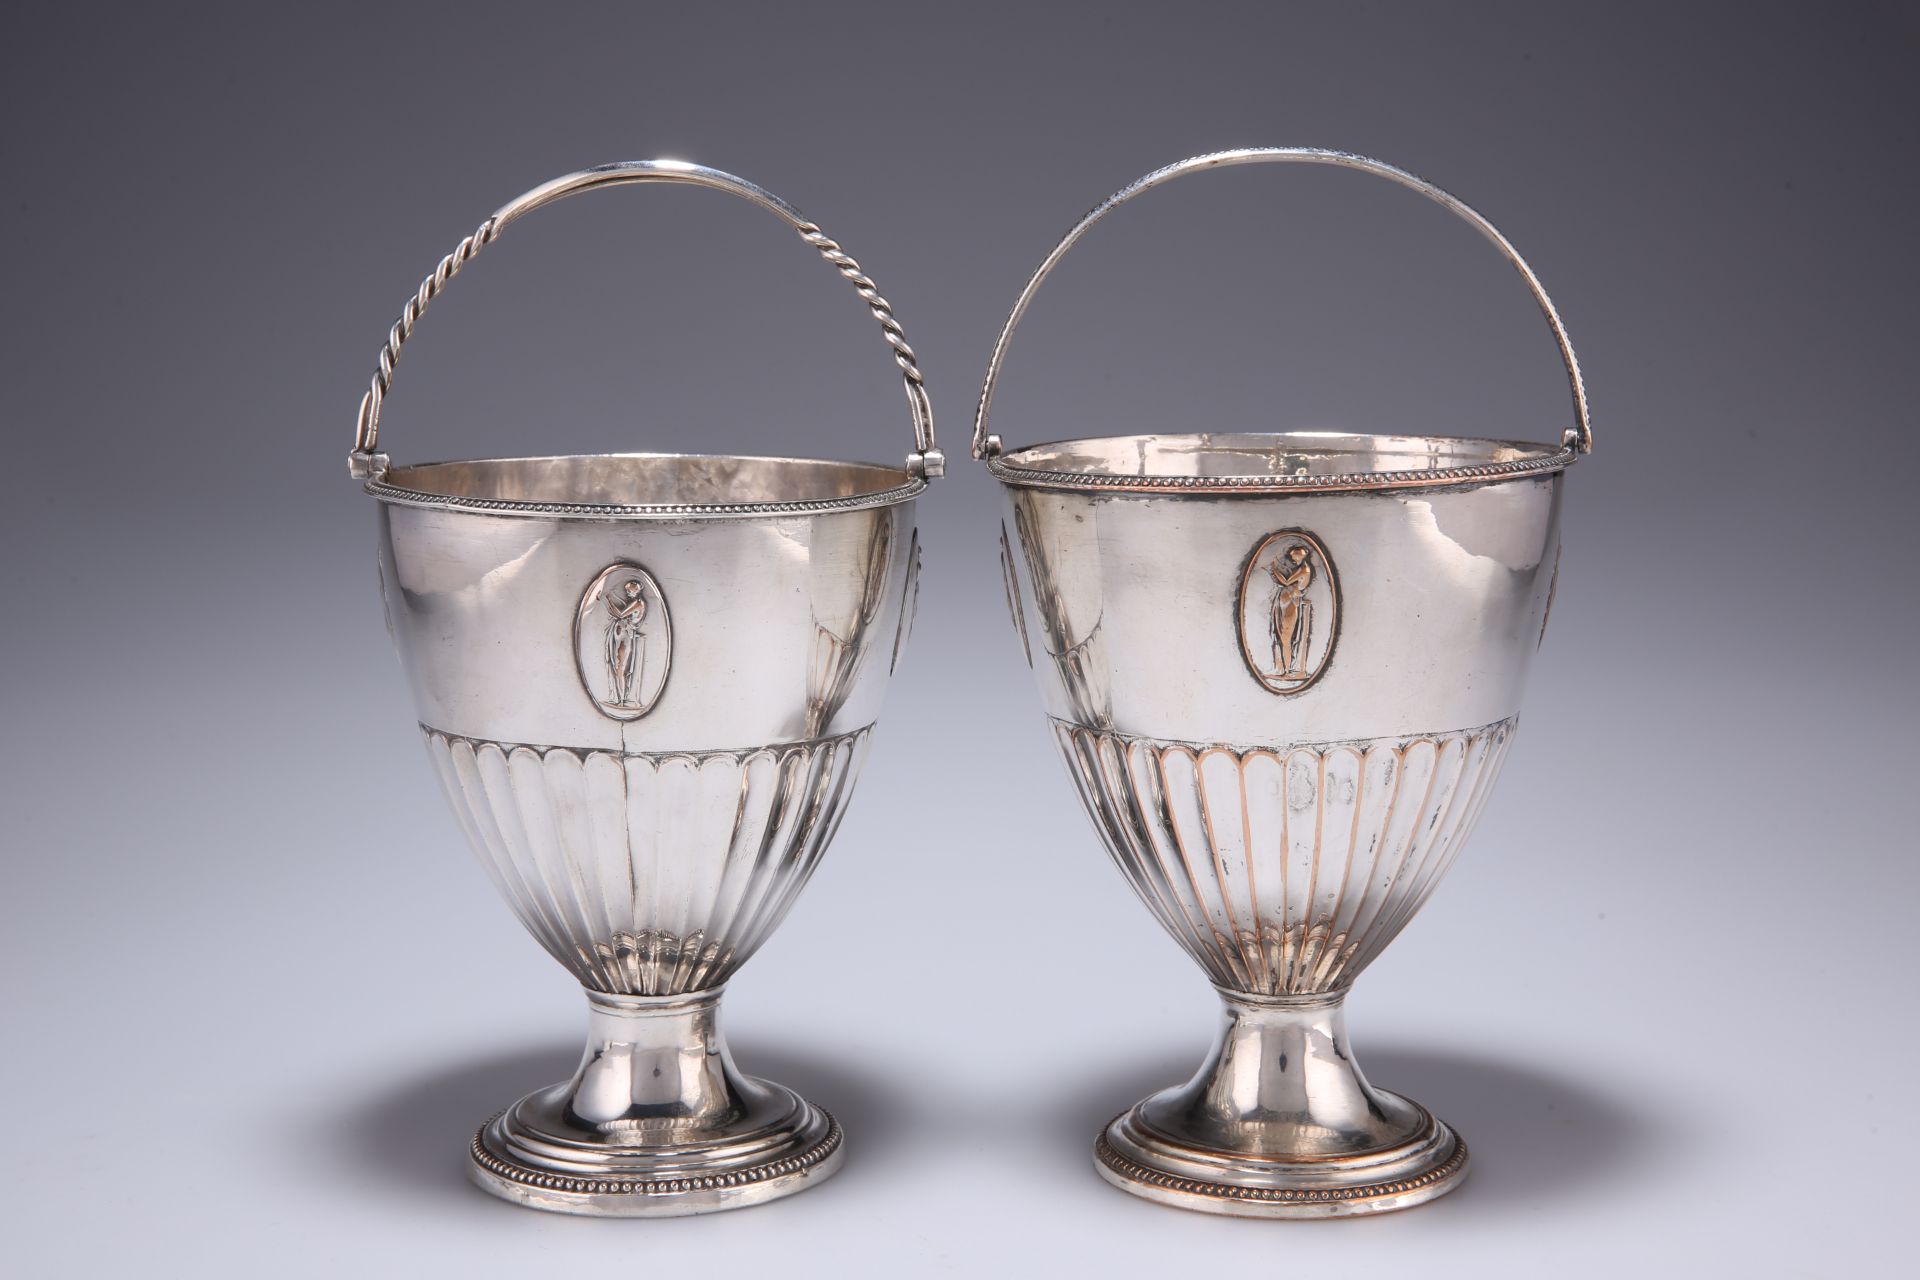 TWO GEORGIAN SILVER-PLATED PEDESTAL BASKETS, each bowl of fluted trumpet form with four applied